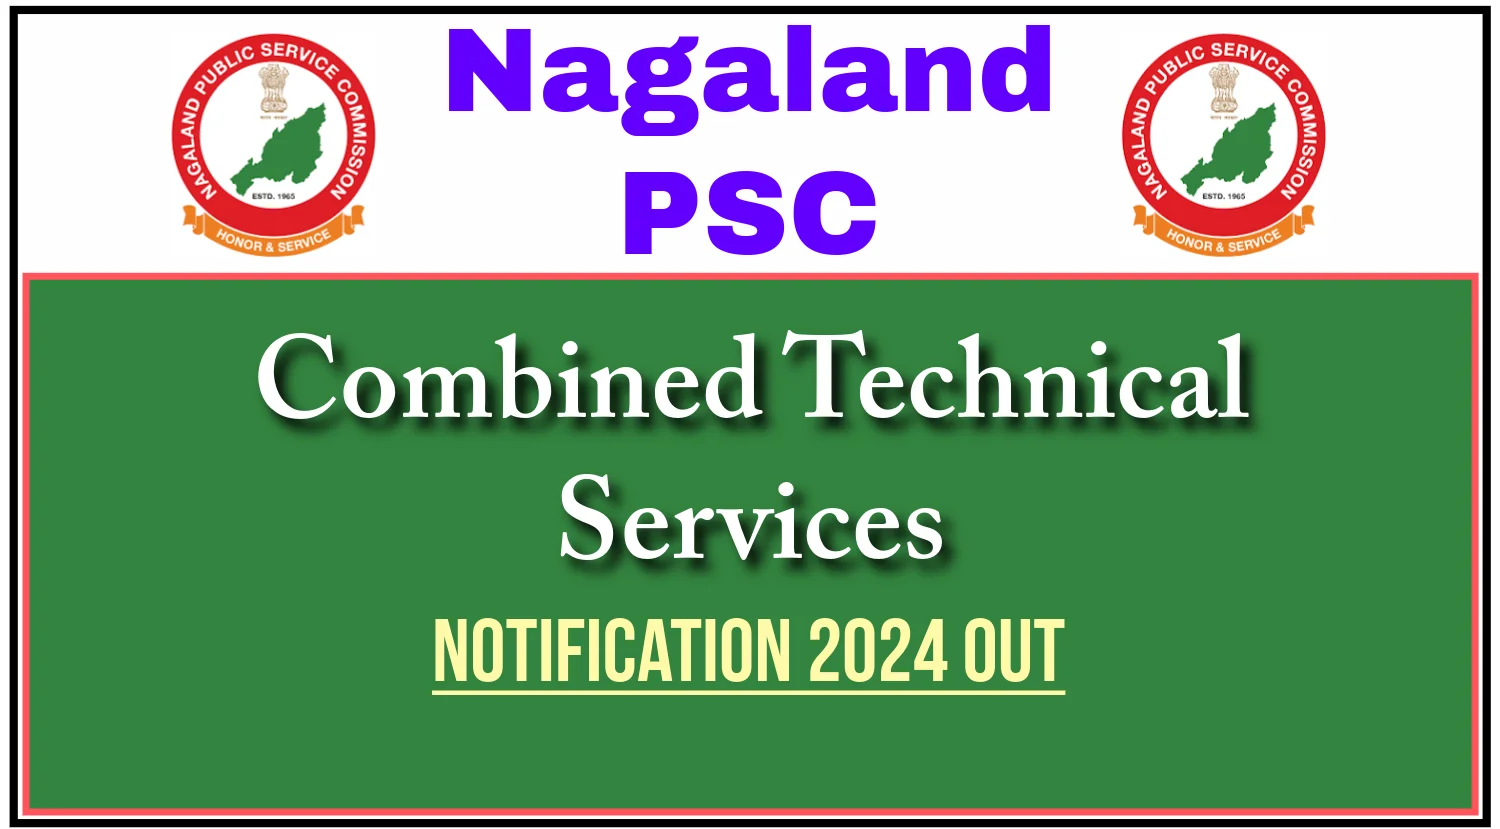 NPSC Combined Technical Service Notification 2024 Out